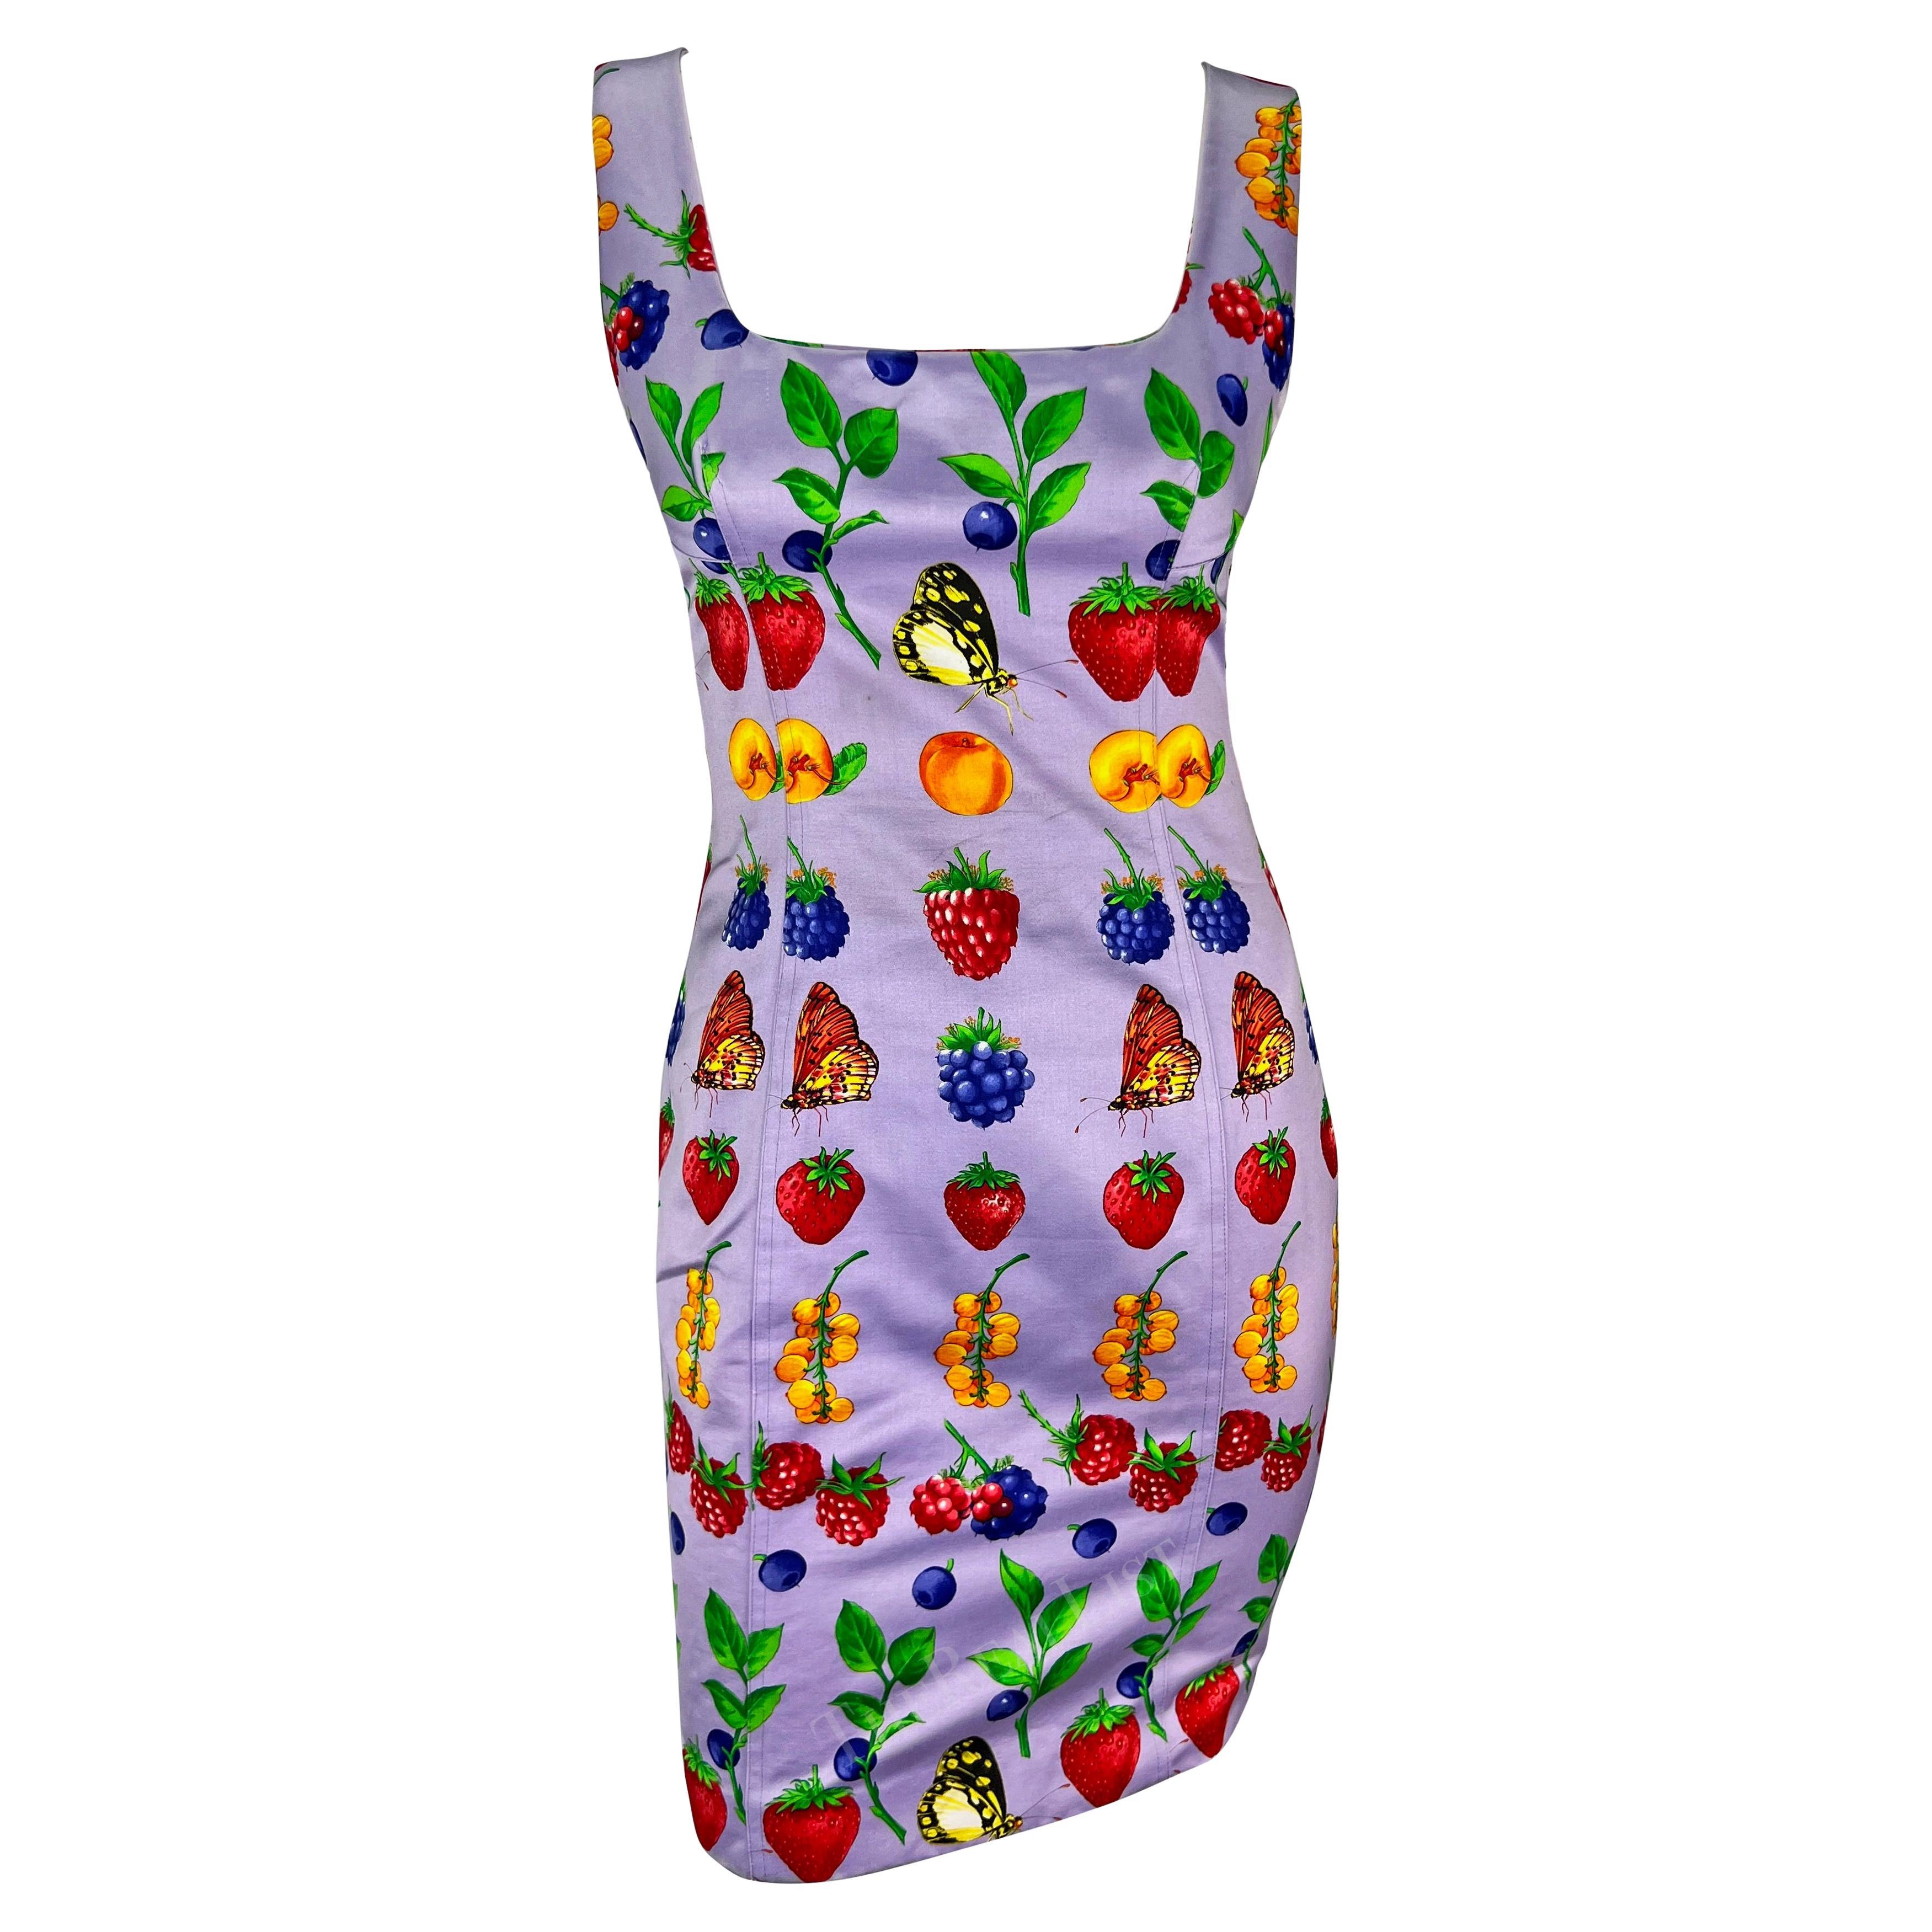 S/S 1995 Gianni Versace Butterfly Berry Garden Print Lavender Pencil Dress For Sale